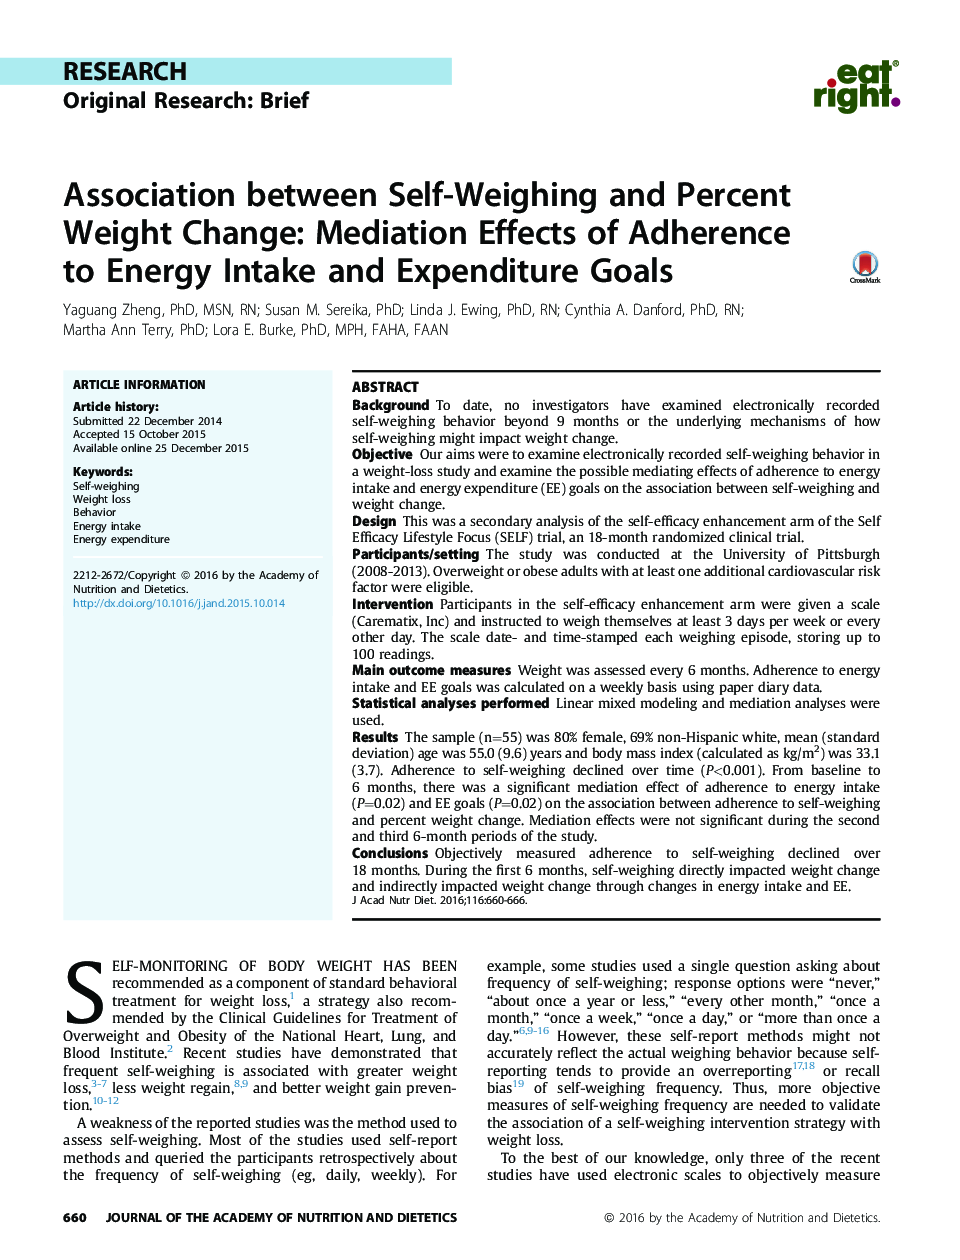 Association between Self-Weighing and Percent Weight Change: Mediation Effects of Adherence to Energy Intake and Expenditure Goals